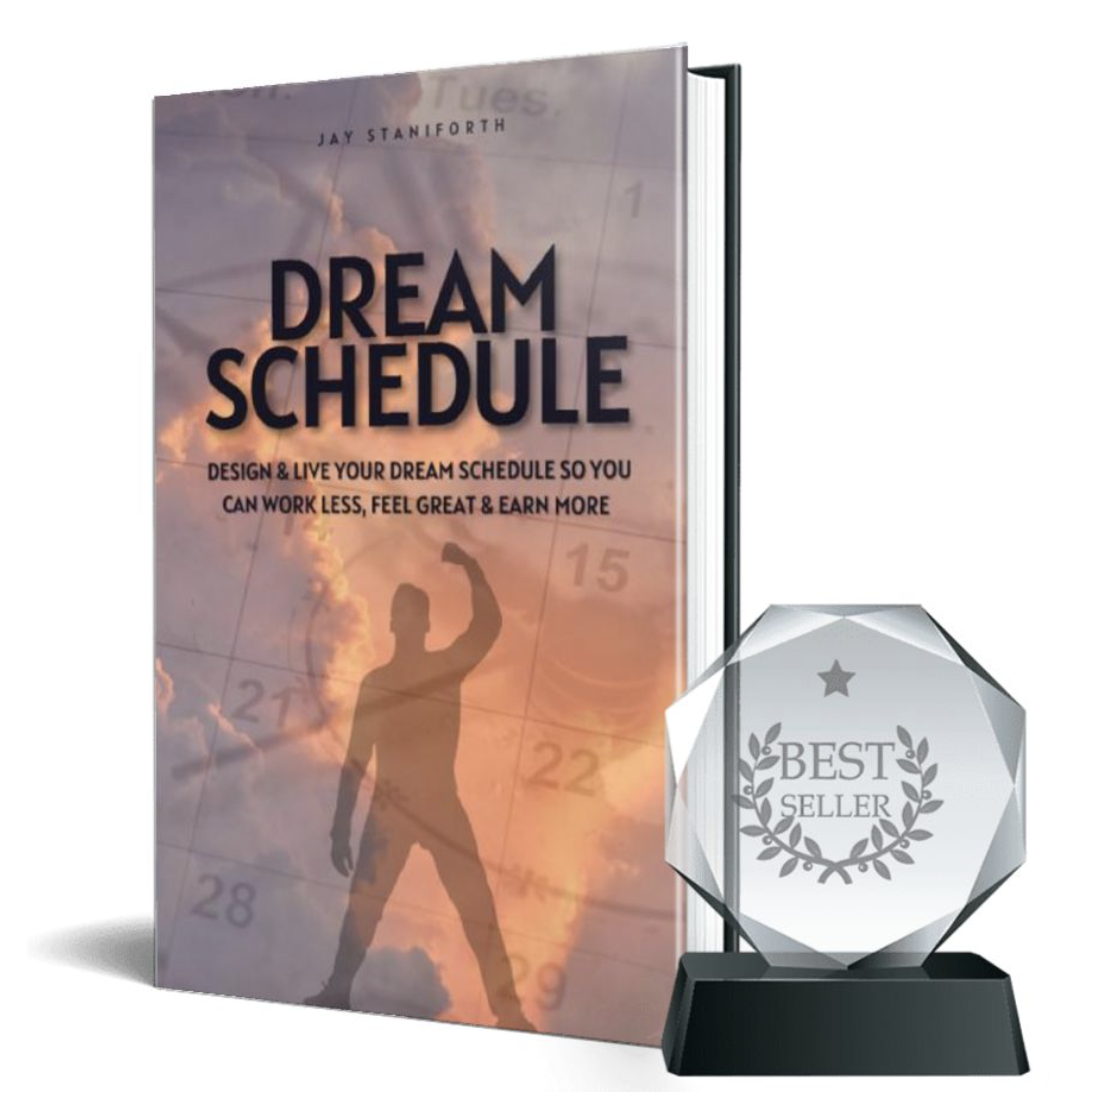 Design & Live Your Dream Daily Schedule Today, So You Can Work Less, Feel Great & Earn More